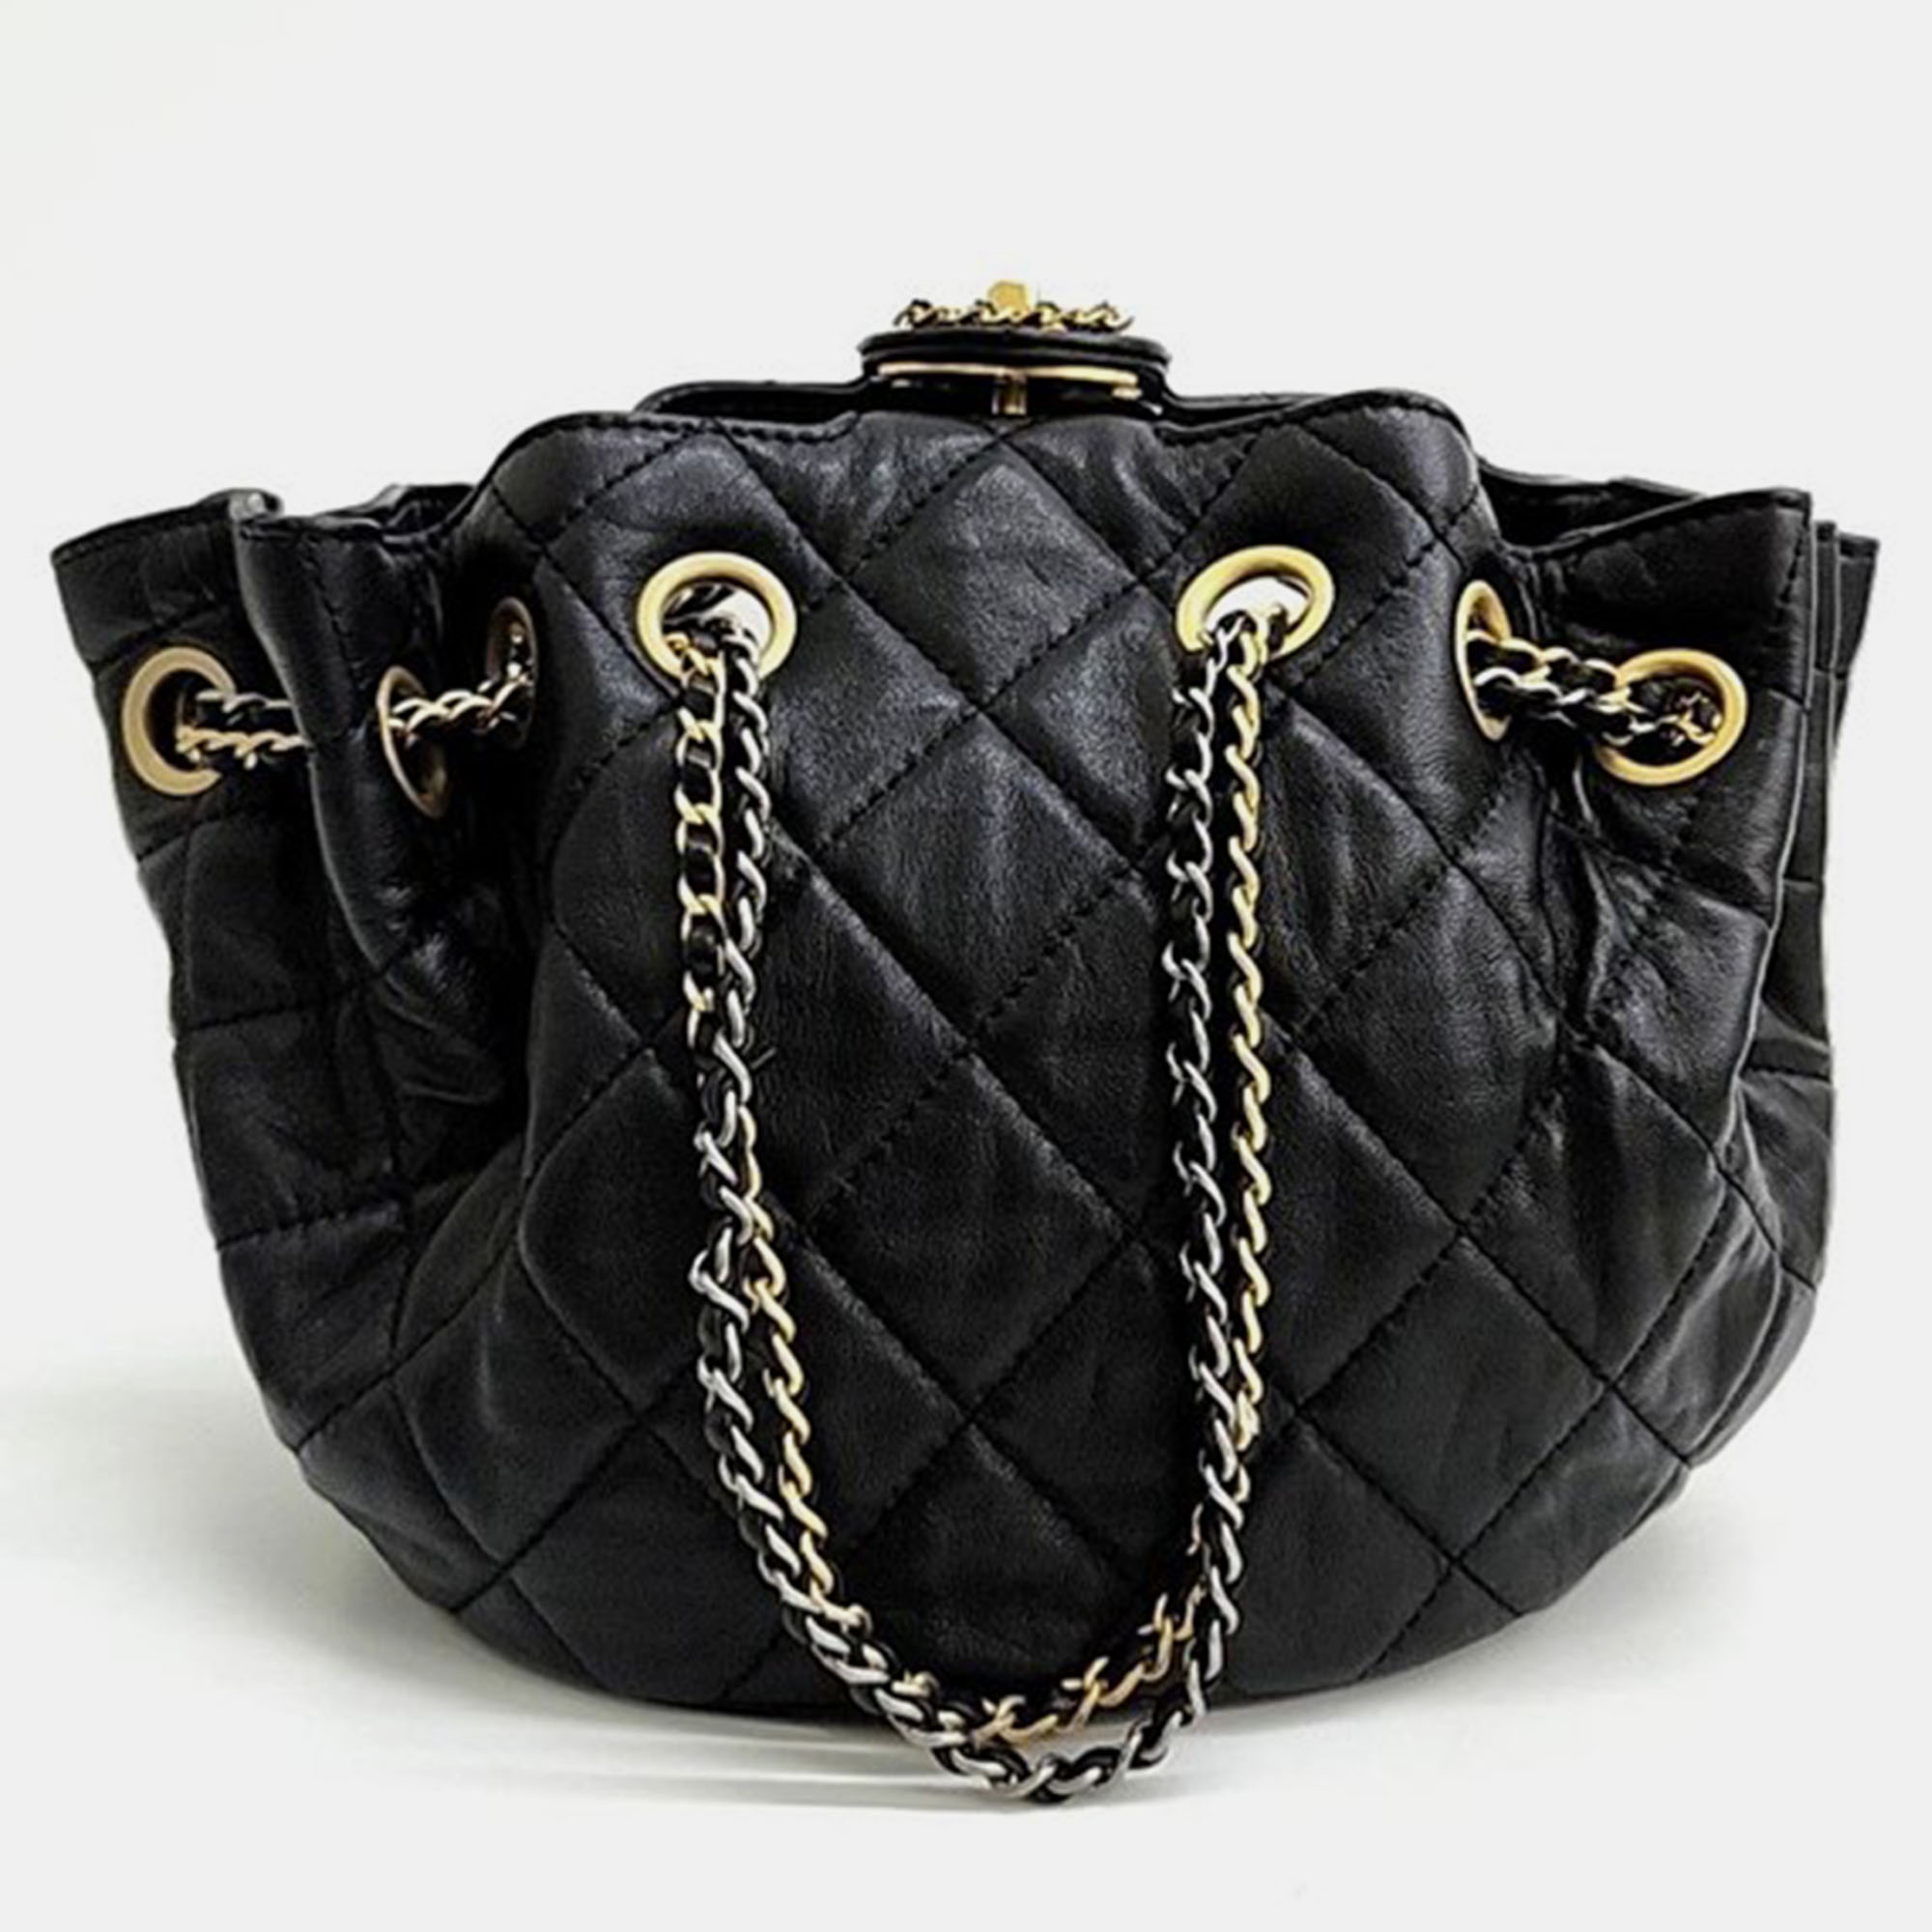 Chanel black leather bucket tote bag